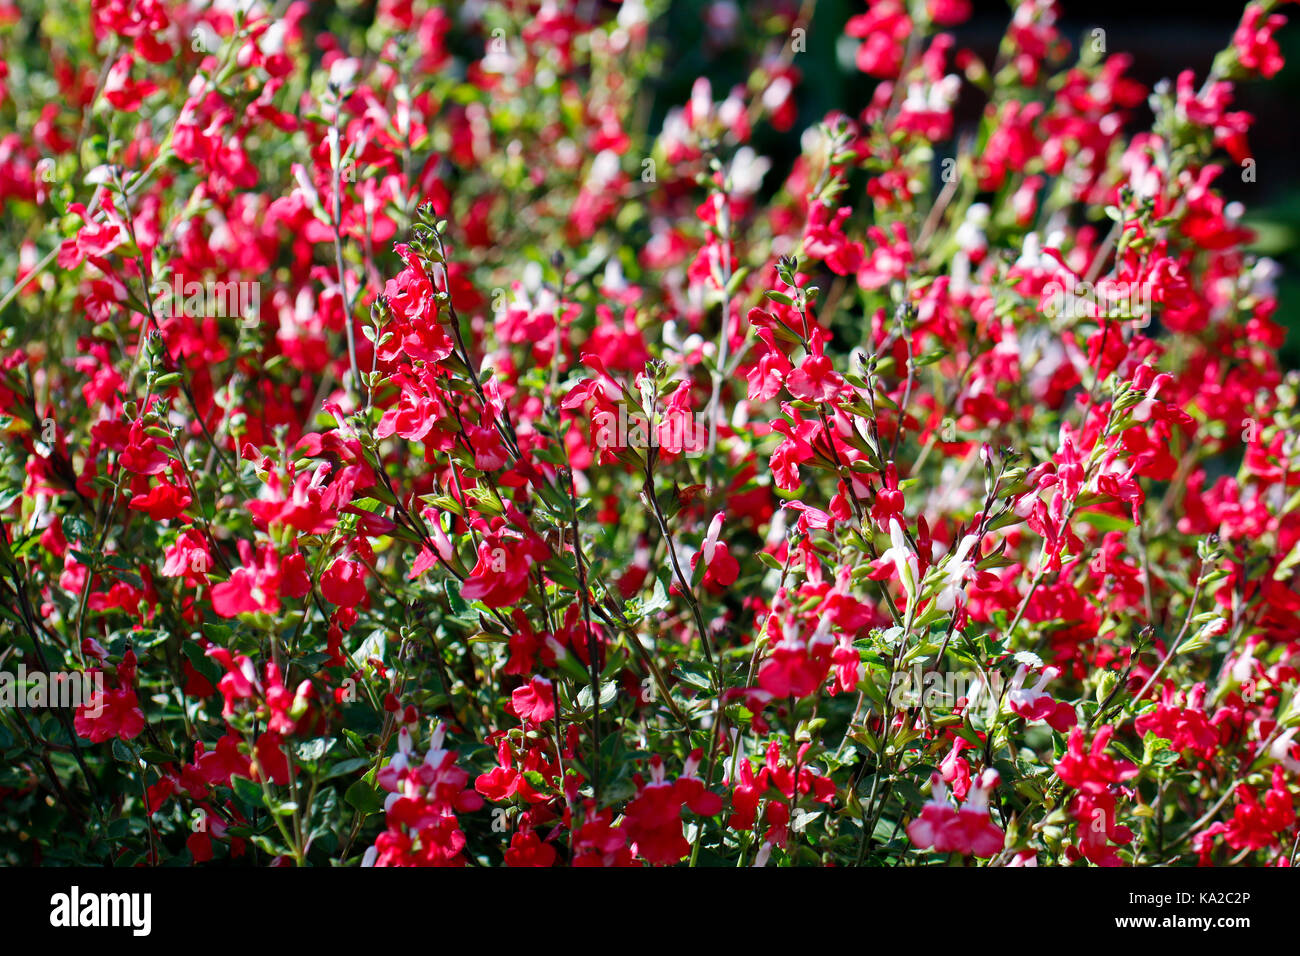 Bunch of red flowers of Salvia Jamensis (Hot Lips) Stock Photo